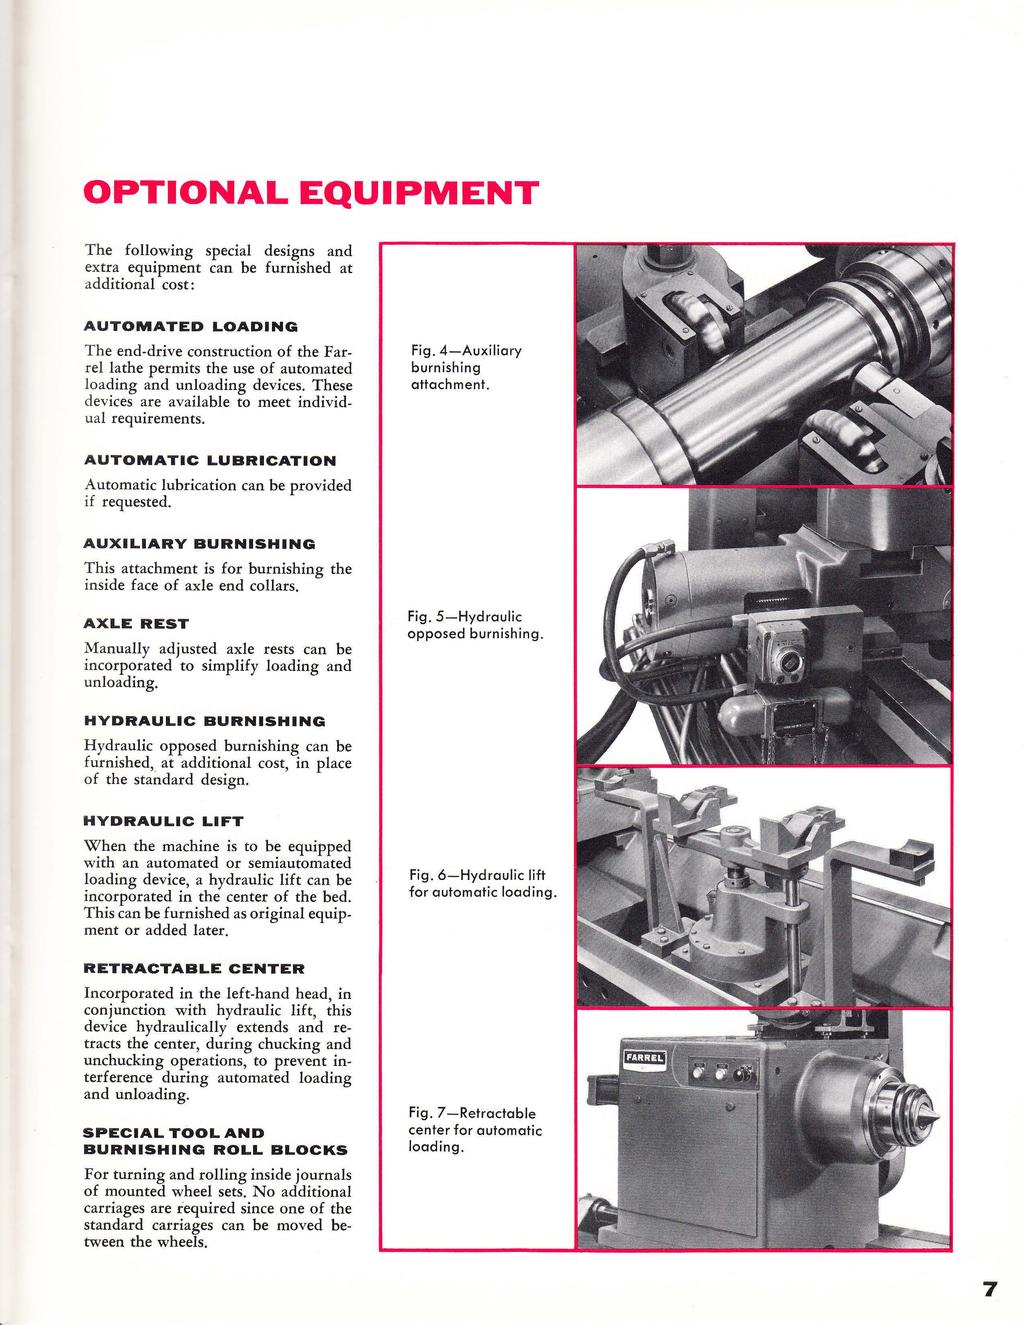 OPTIONAL EQUIPMENT The following special designs and extra equipment can be furnished at additional cost: AUTOMATED LOADING The end-drive construction of the Farrel lathe permits the use of automated